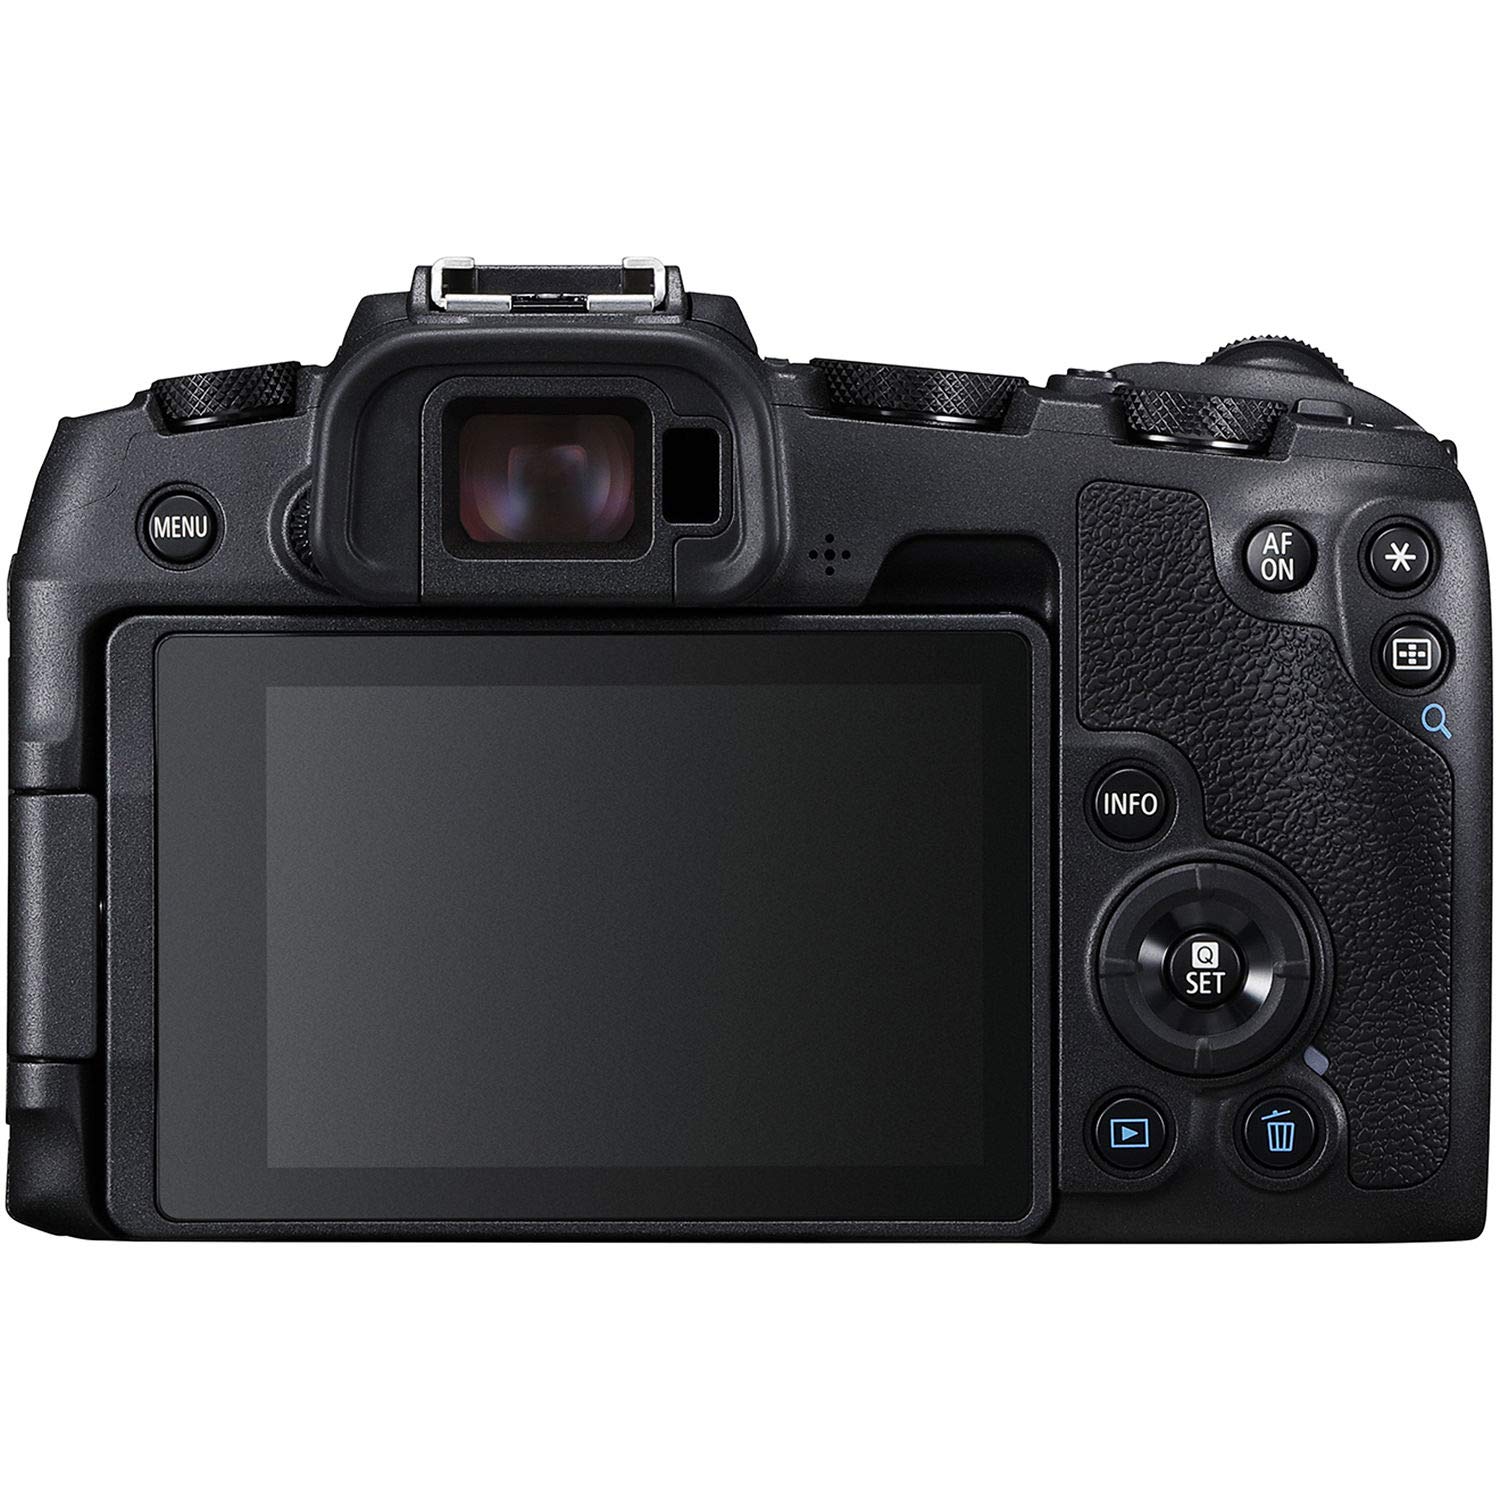 Canon EOS RP Mirrorless Digital Camera (Body Only) - Includes - Cleaning Kit, Memory Card Kit, Carrying Case Bundle